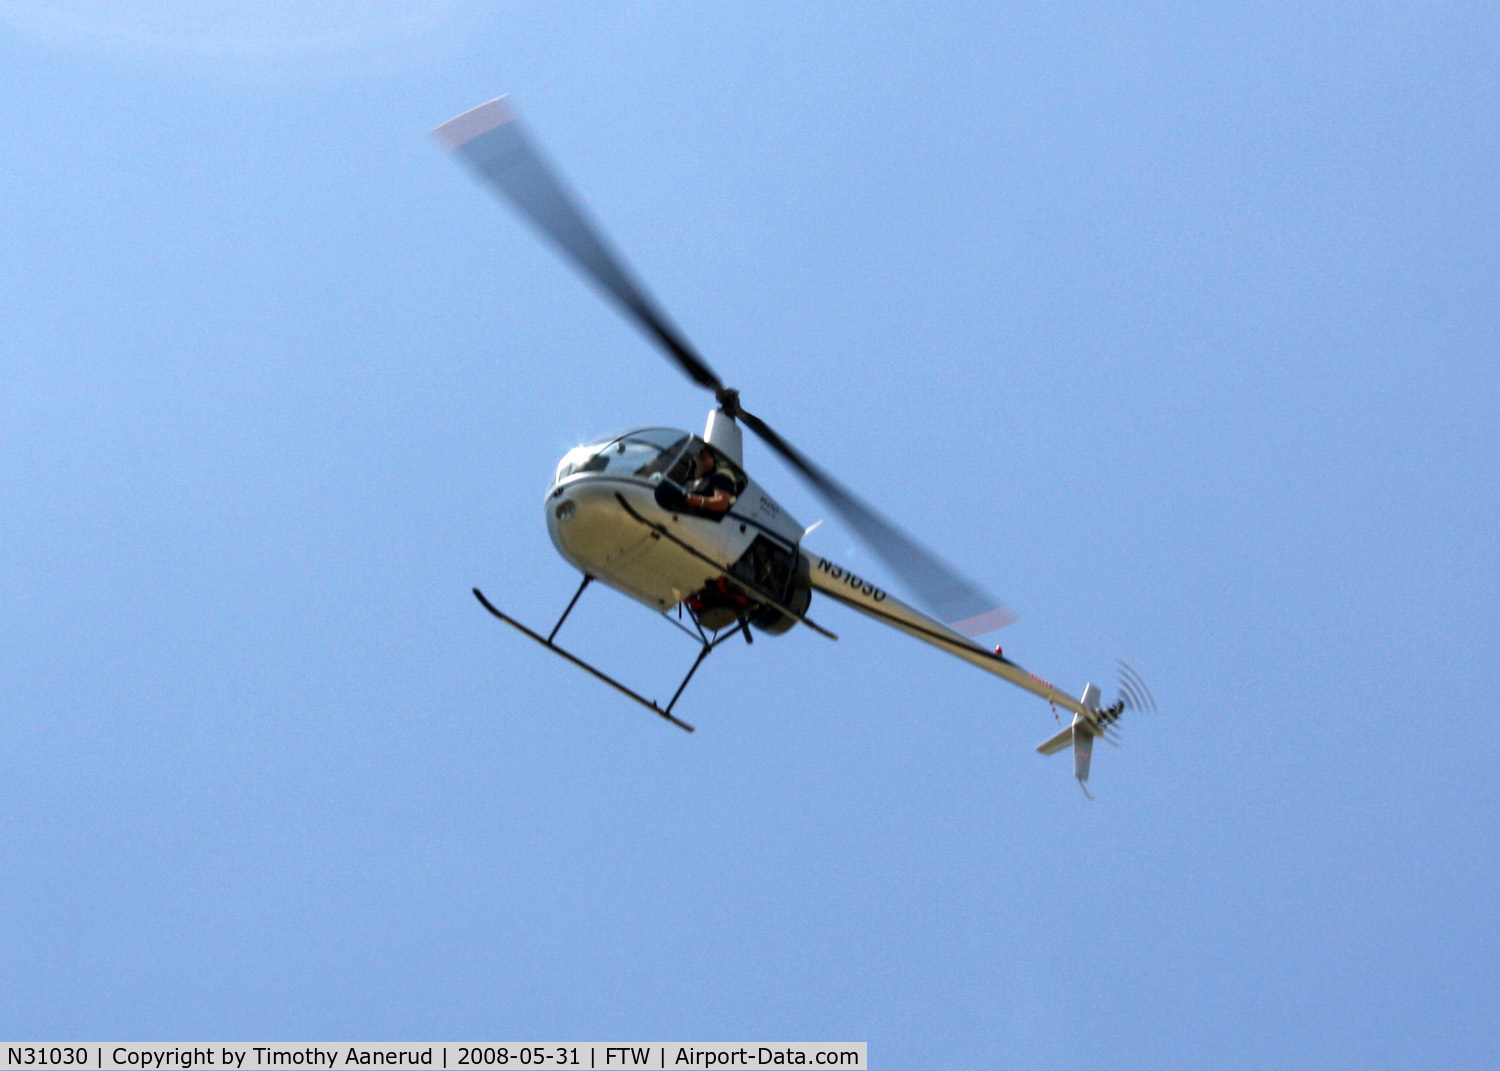 N31030, 2006 Robinson R22 Beta C/N 4059, Flying past the Cowtown Warbird Roundup